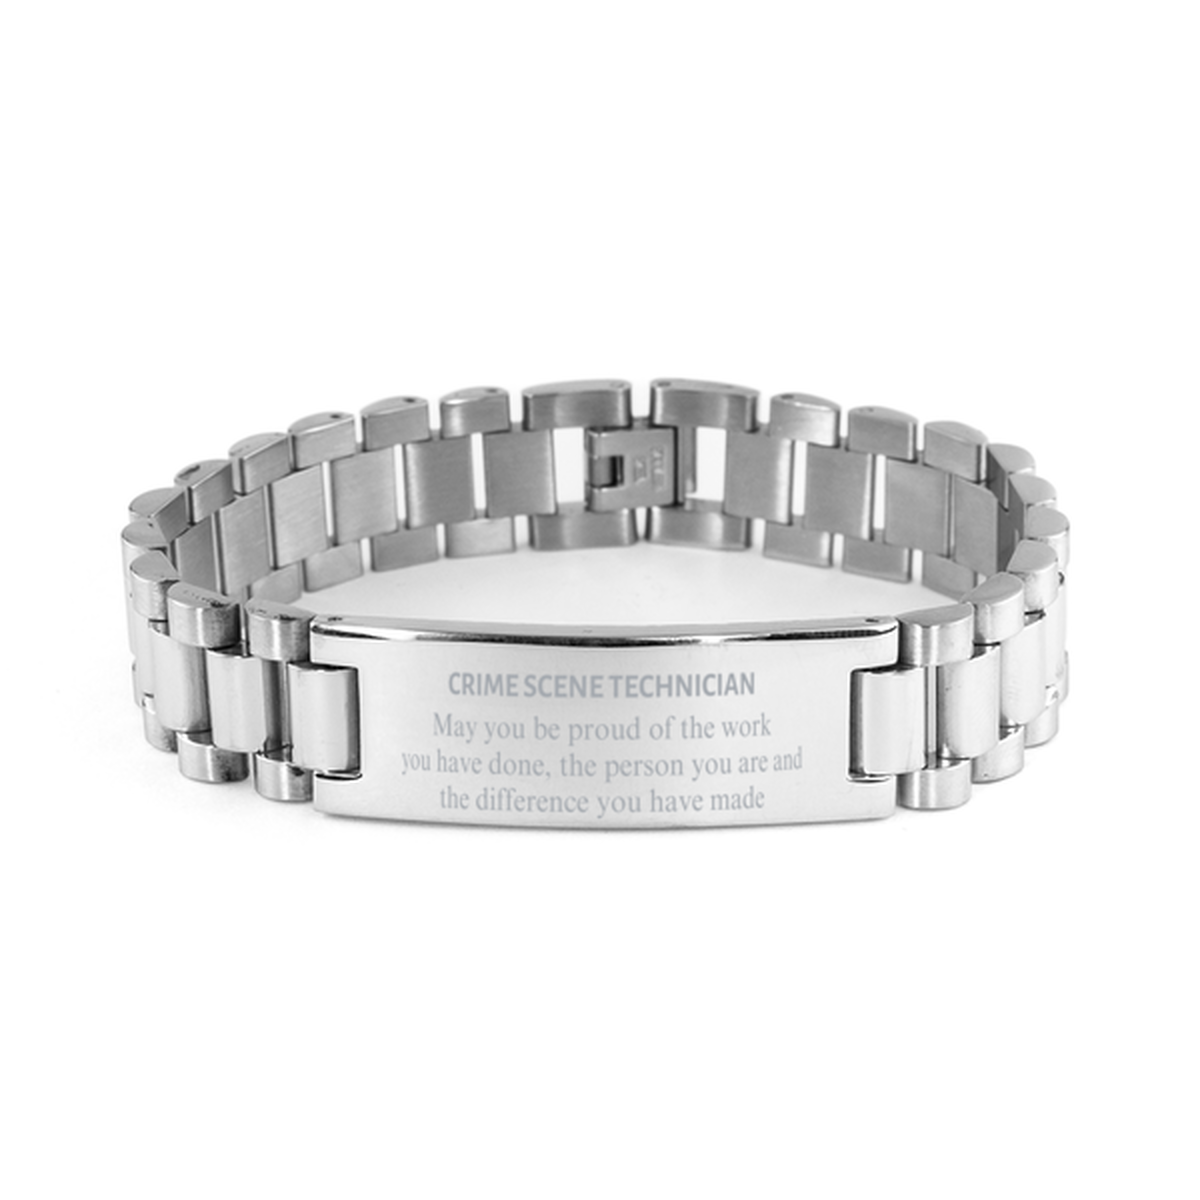 Crime Scene Technician May you be proud of the work you have done, Retirement Crime Scene Technician Ladder Stainless Steel Bracelet for Colleague Appreciation Gifts Amazing for Crime Scene Technician